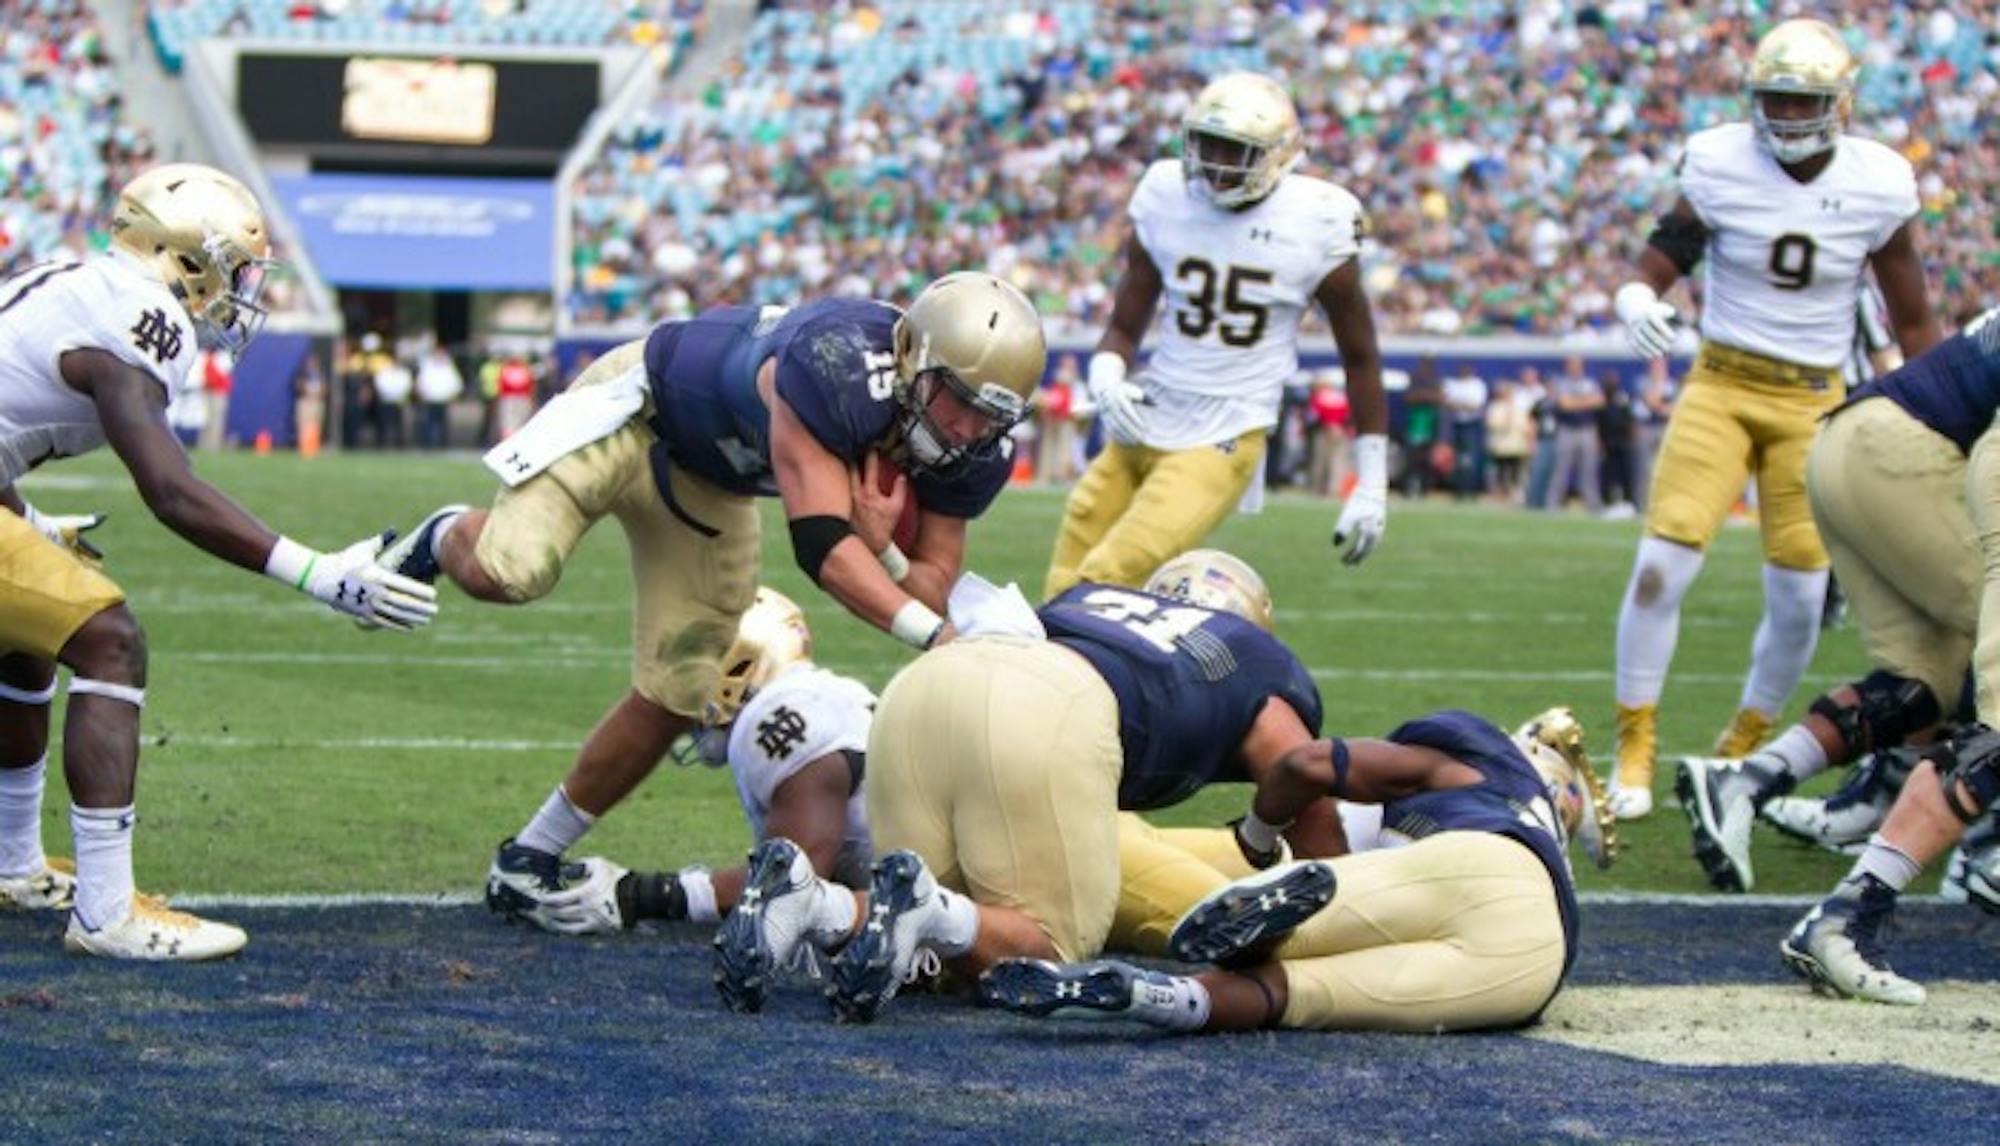 Navy senior quarterback Will Worth dives into the end zone during Notre Dame's 28-27 loss to the Midshipmen on Saturday in Jacksonville. Worth ran for 175 yards and two touchdowns in the Navy win.